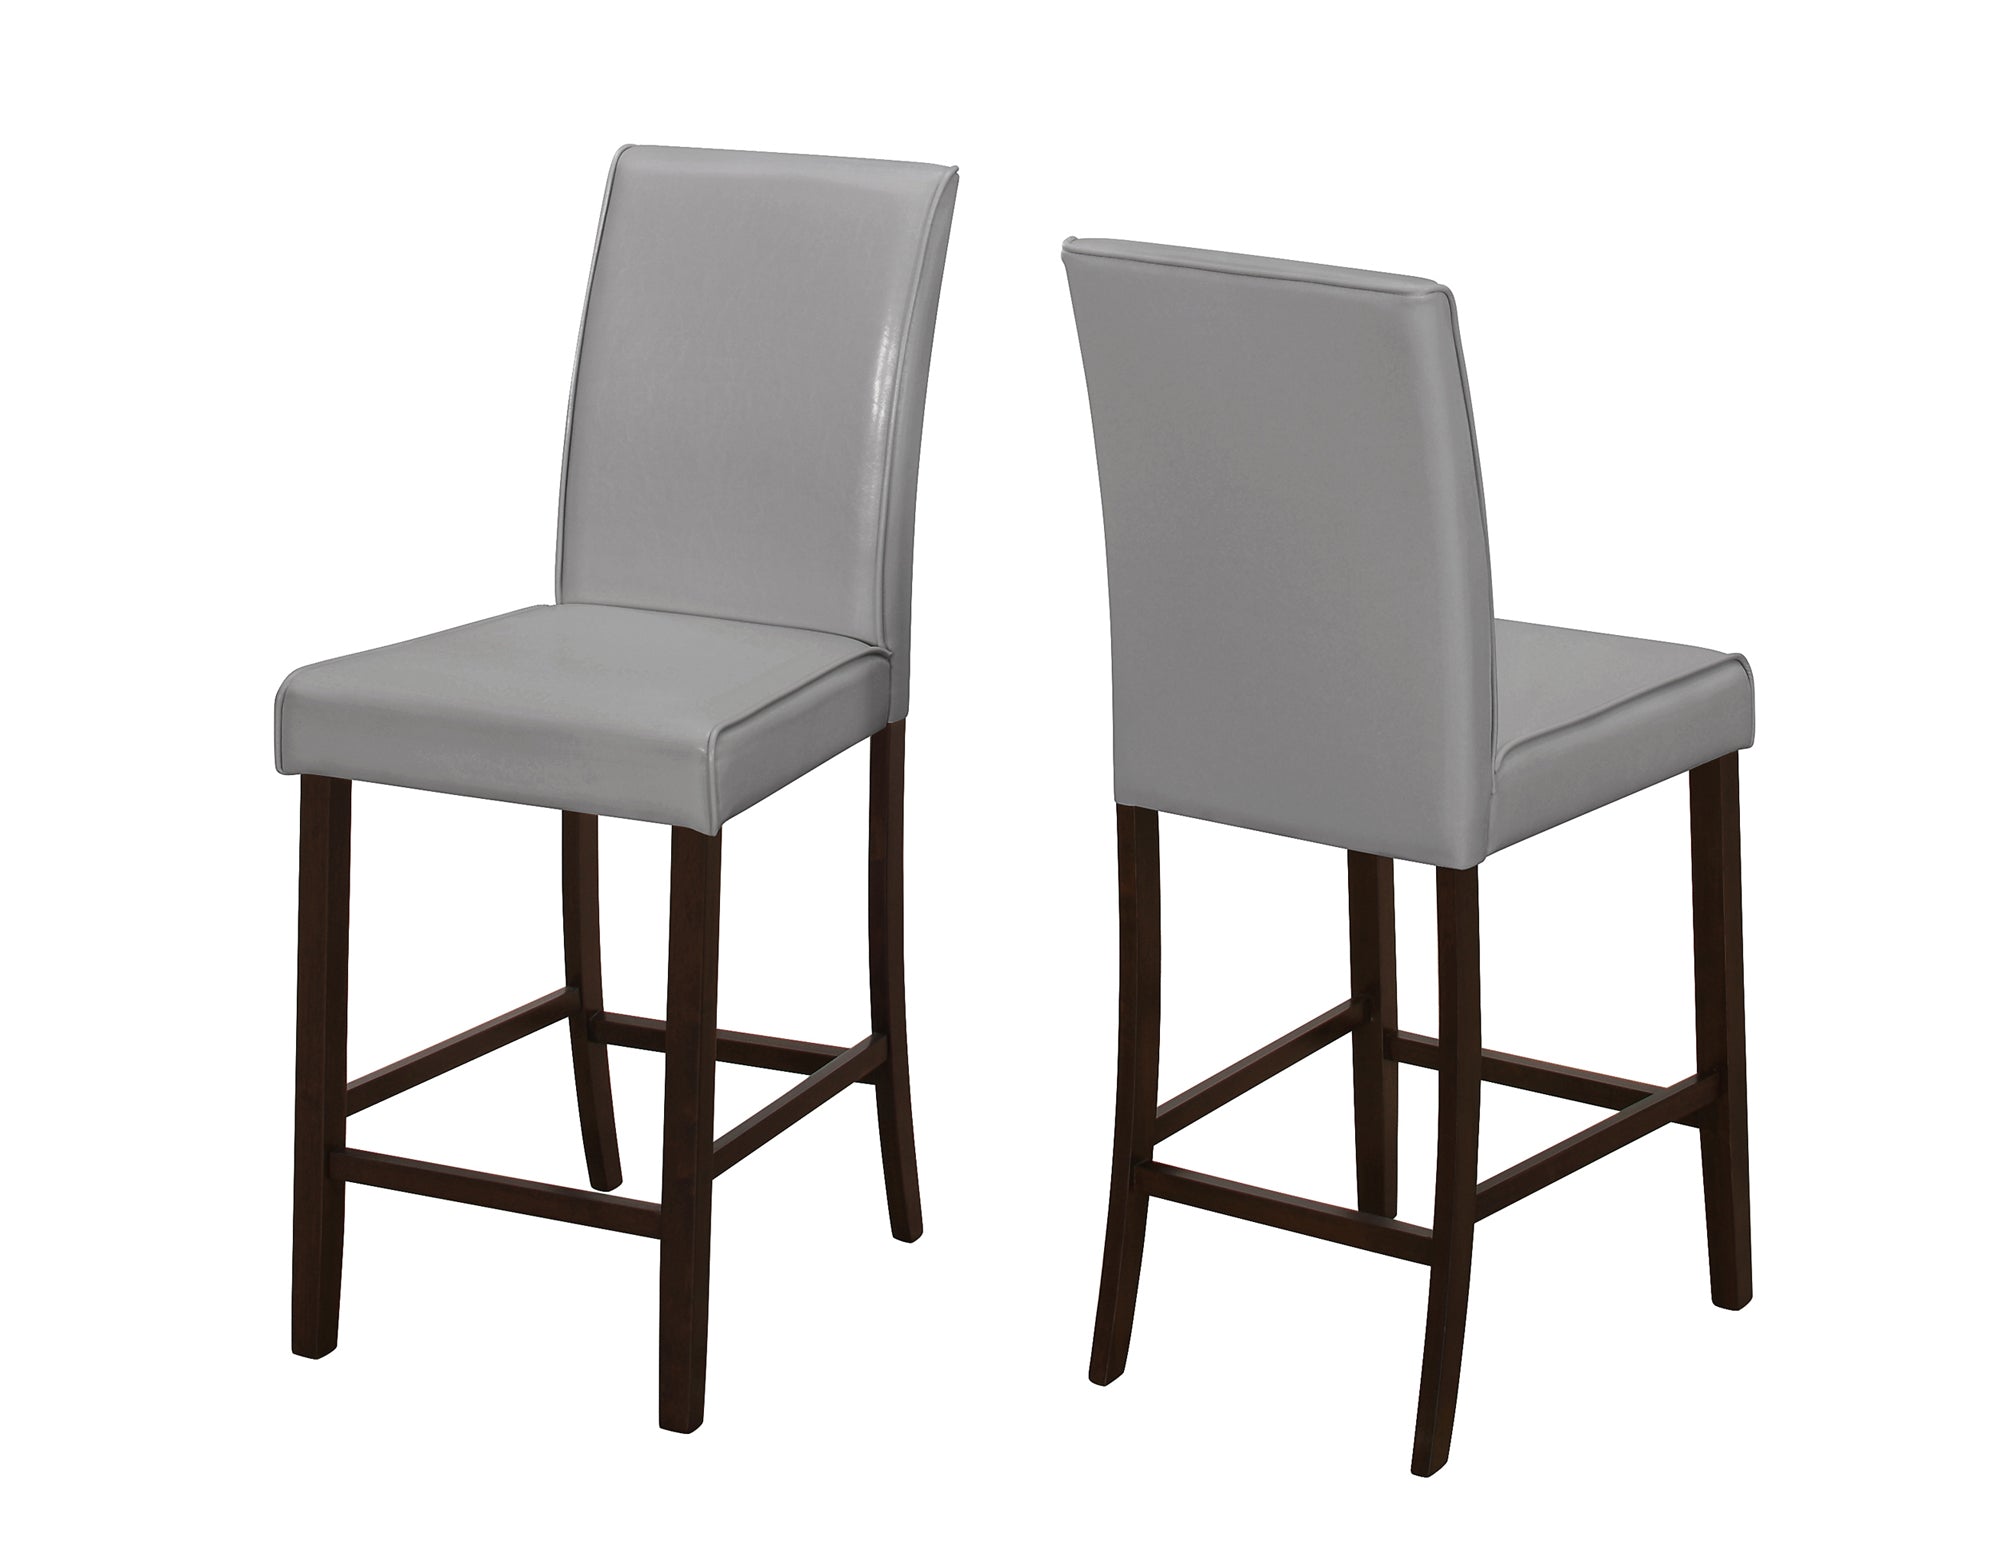 Dining Chair - 2Pcs / Grey Leather-Look Counter Height